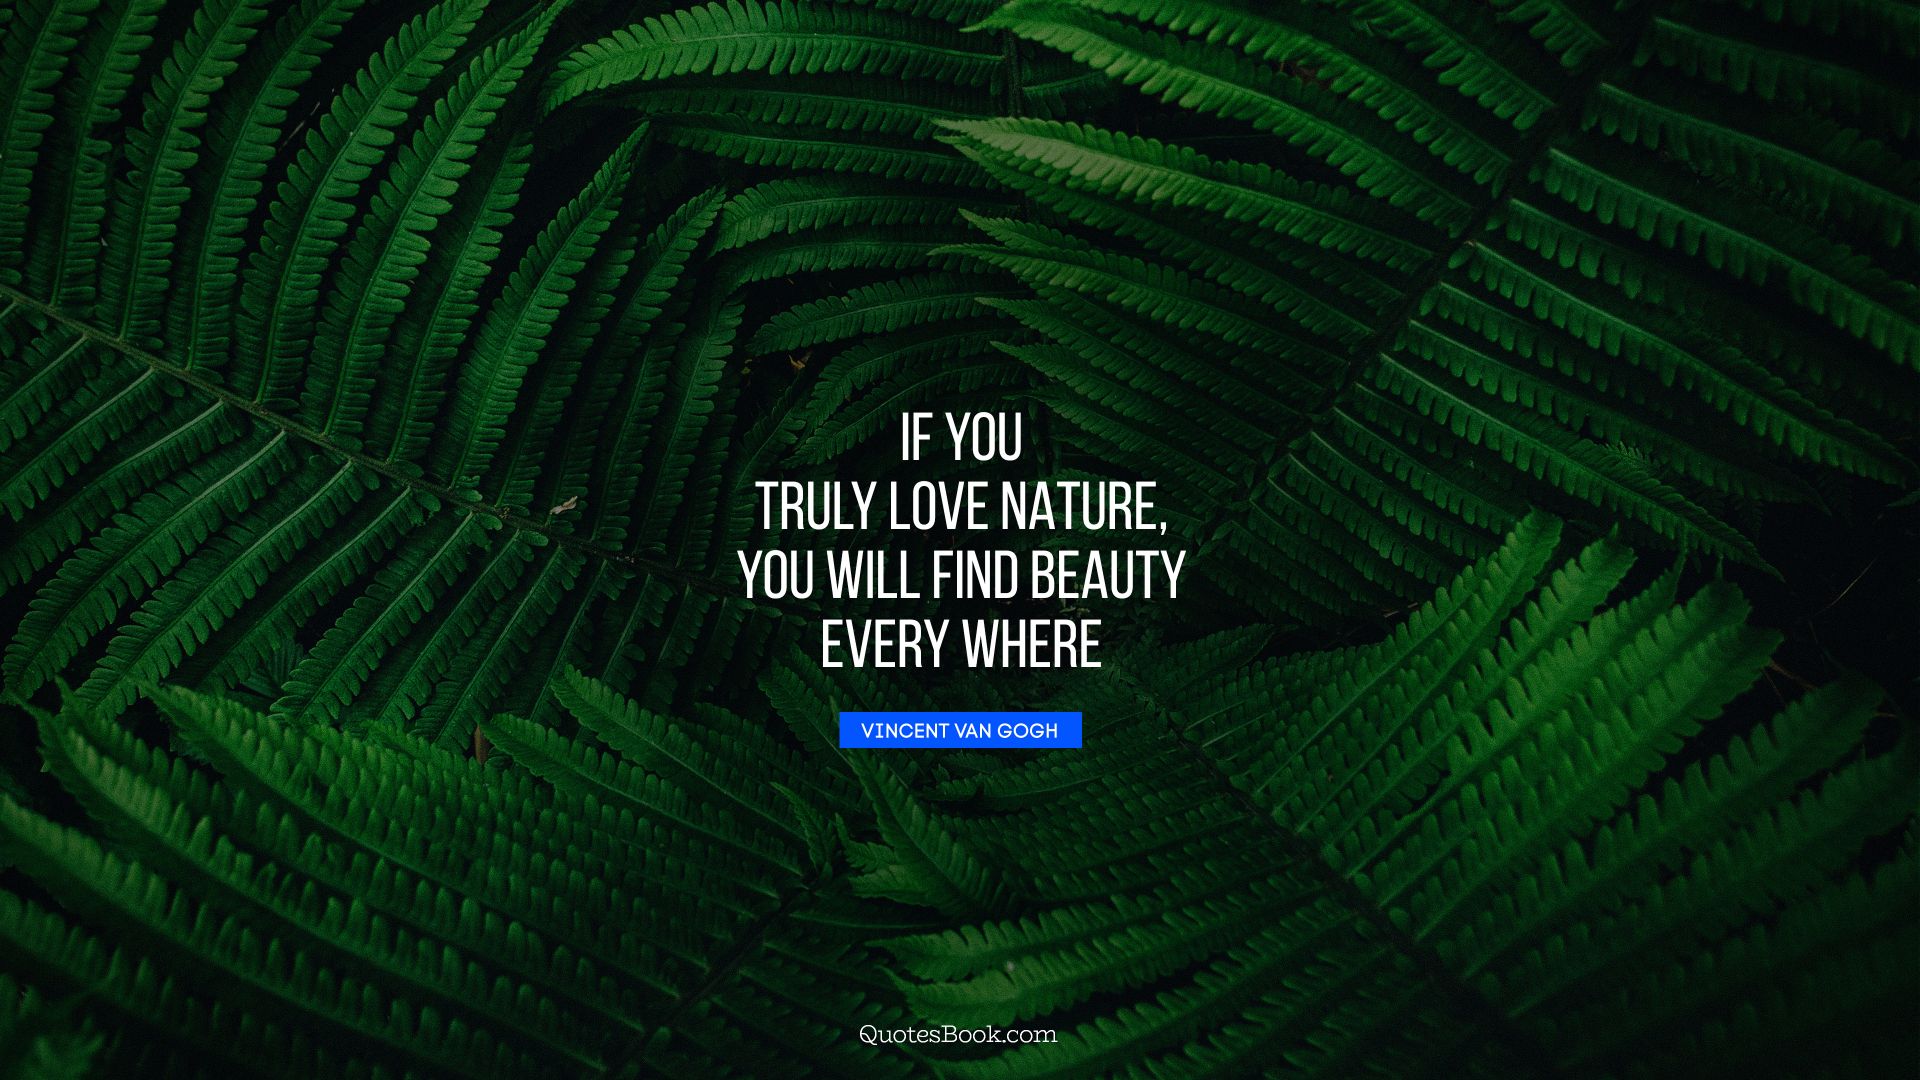 If you truly love nature, you will find beauty every where. - Quote by Vincent van Gogh